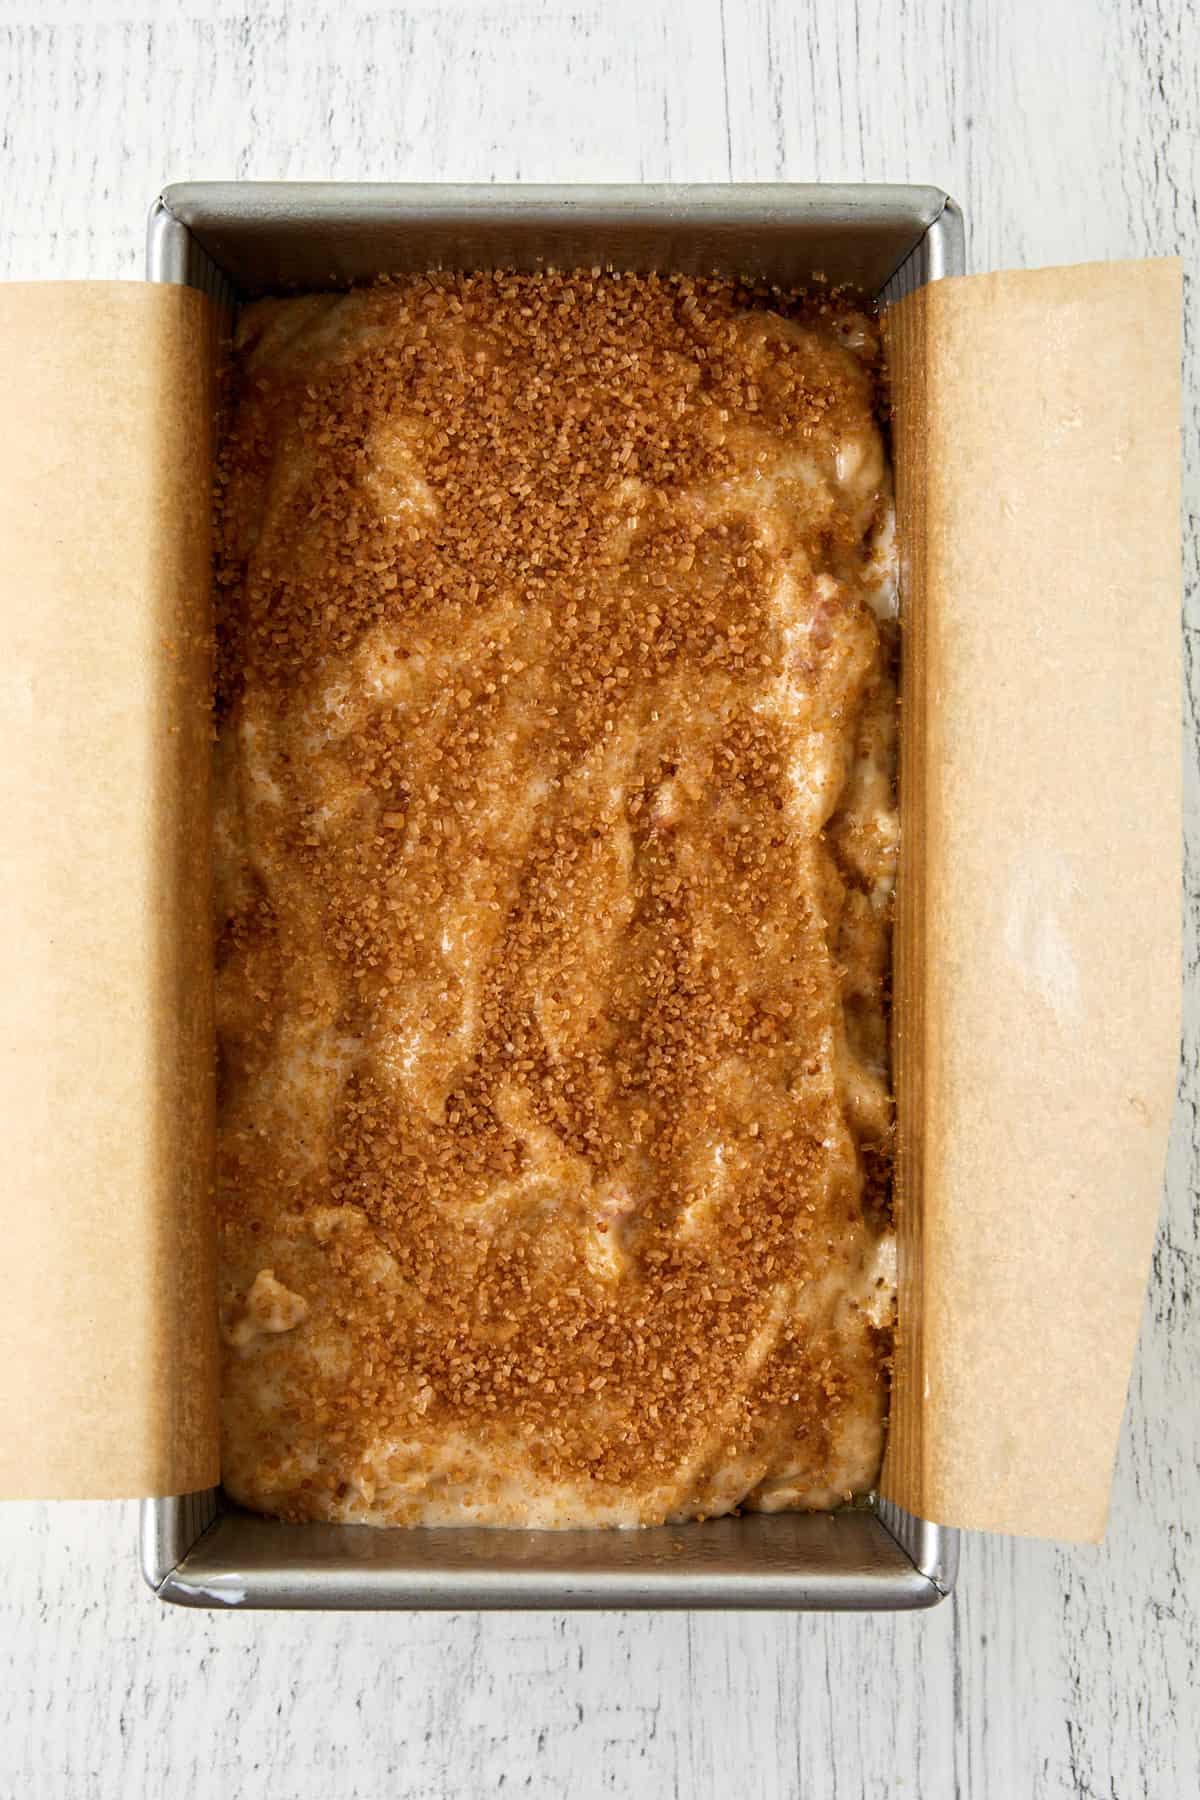 Overhead view of banana rhubarb bread batter in a loaf pan with turbinado sugar on top and lined with parchment paper.